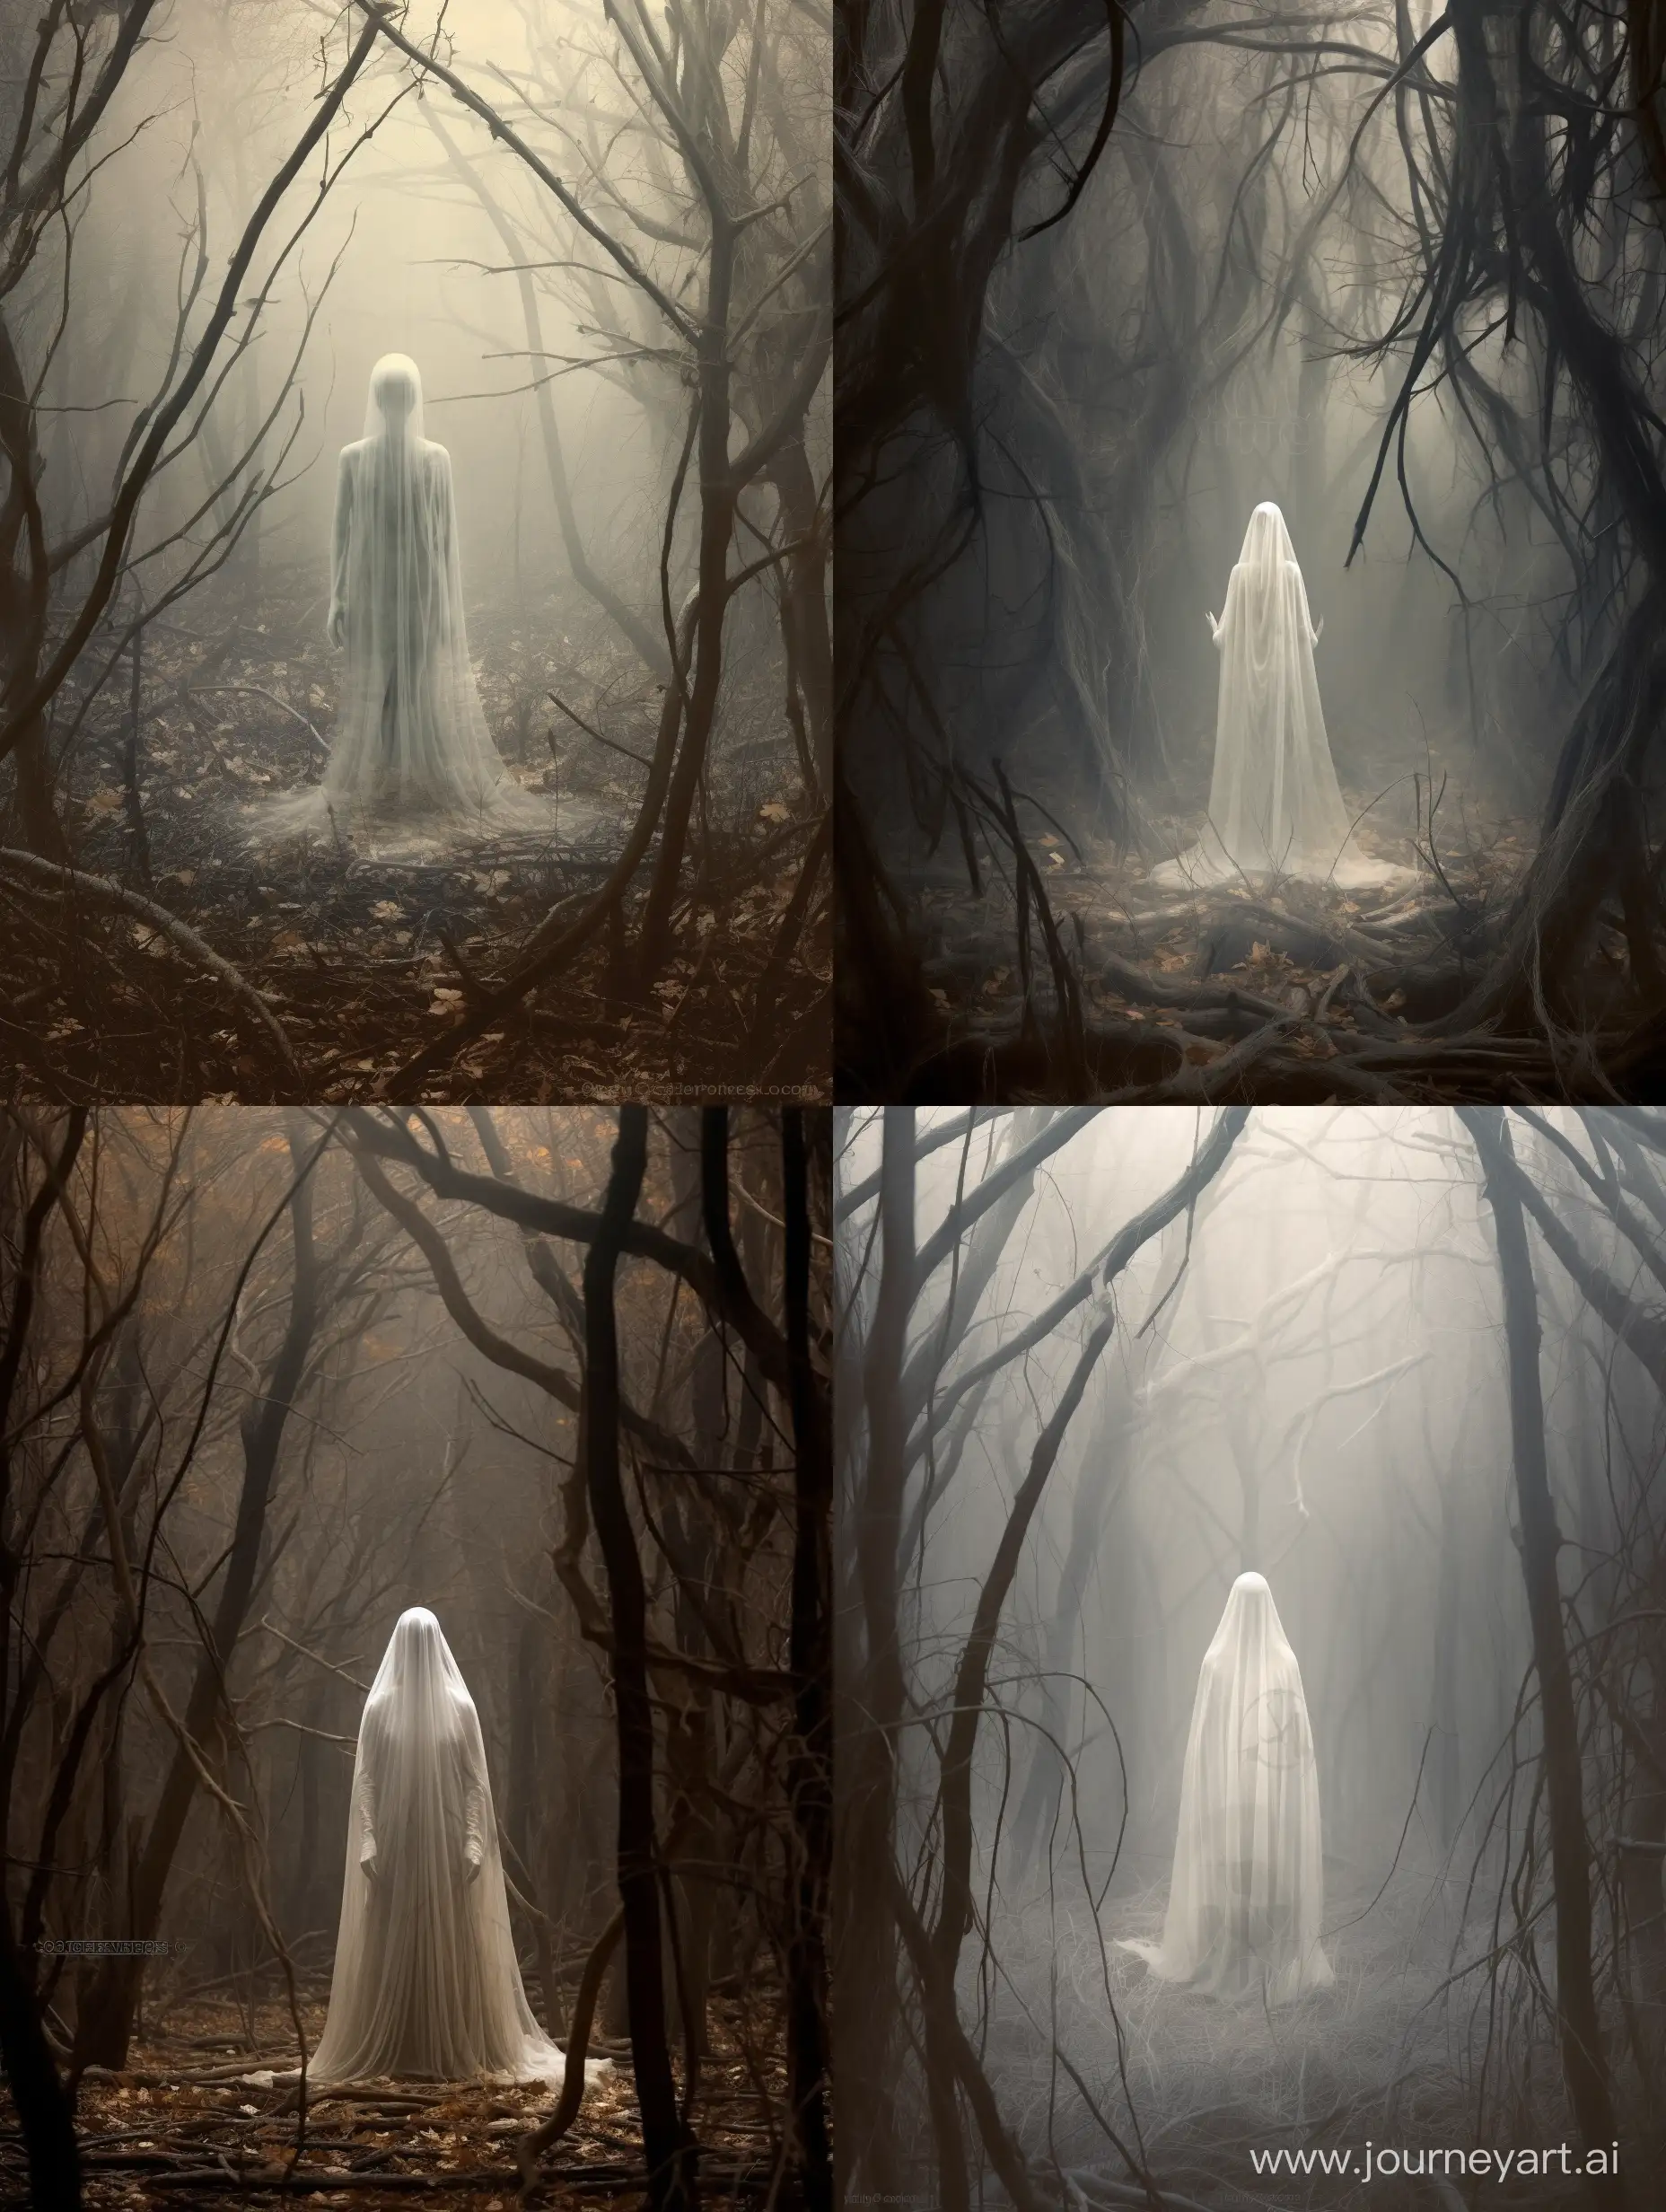 A misty autumn forest clearing is illuminated by the pale moonlight shining down through the sparse canopy of skeletal trees. In the center stands a lone ethereal figure - a female skeleton with wispy white hair that flows around her like woven spider silk in the soft breeze. She is dressed in a flowing gossamer gown the color of moonbeams, and her bony fingers dance elegantly across the strings of a towering arched harp as lustrous as polished mother-of-pearl. Hyper-detailed imagery brings this otherworldly vision to startling realistic life.